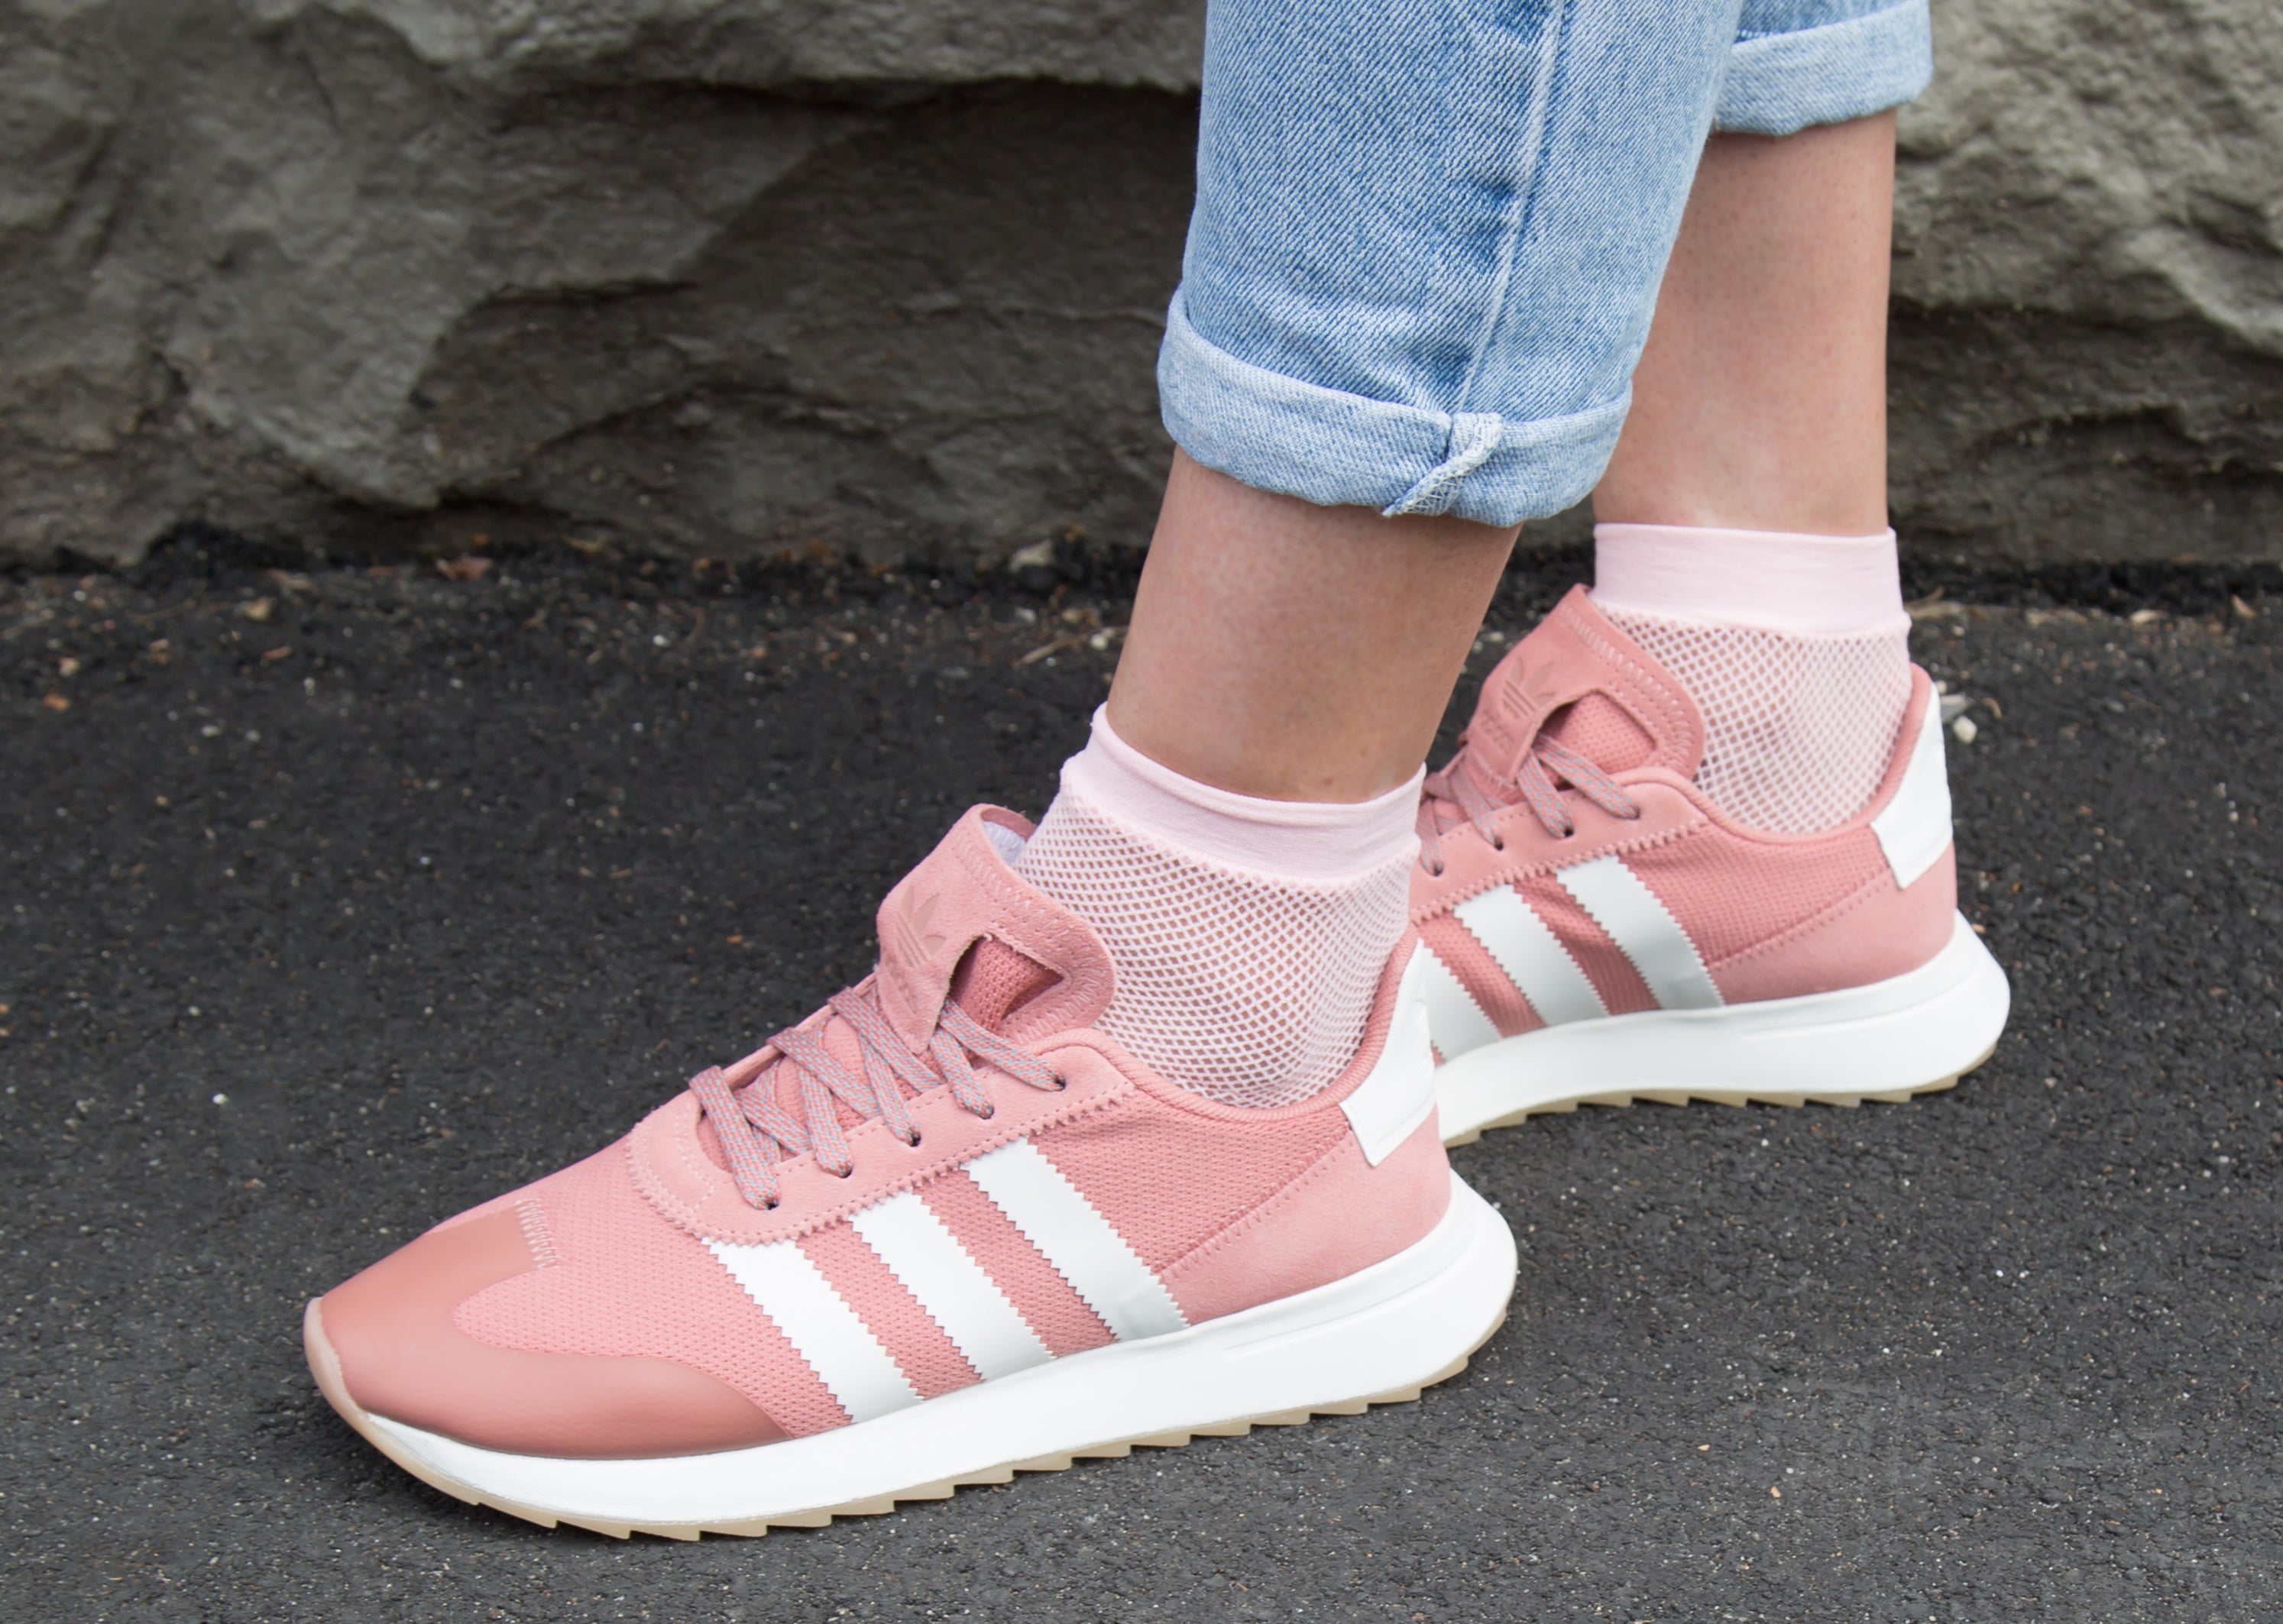 alma colorante Ennegrecer adidas Flashback | October 27 | SNEAKER RELEASES – Finesse